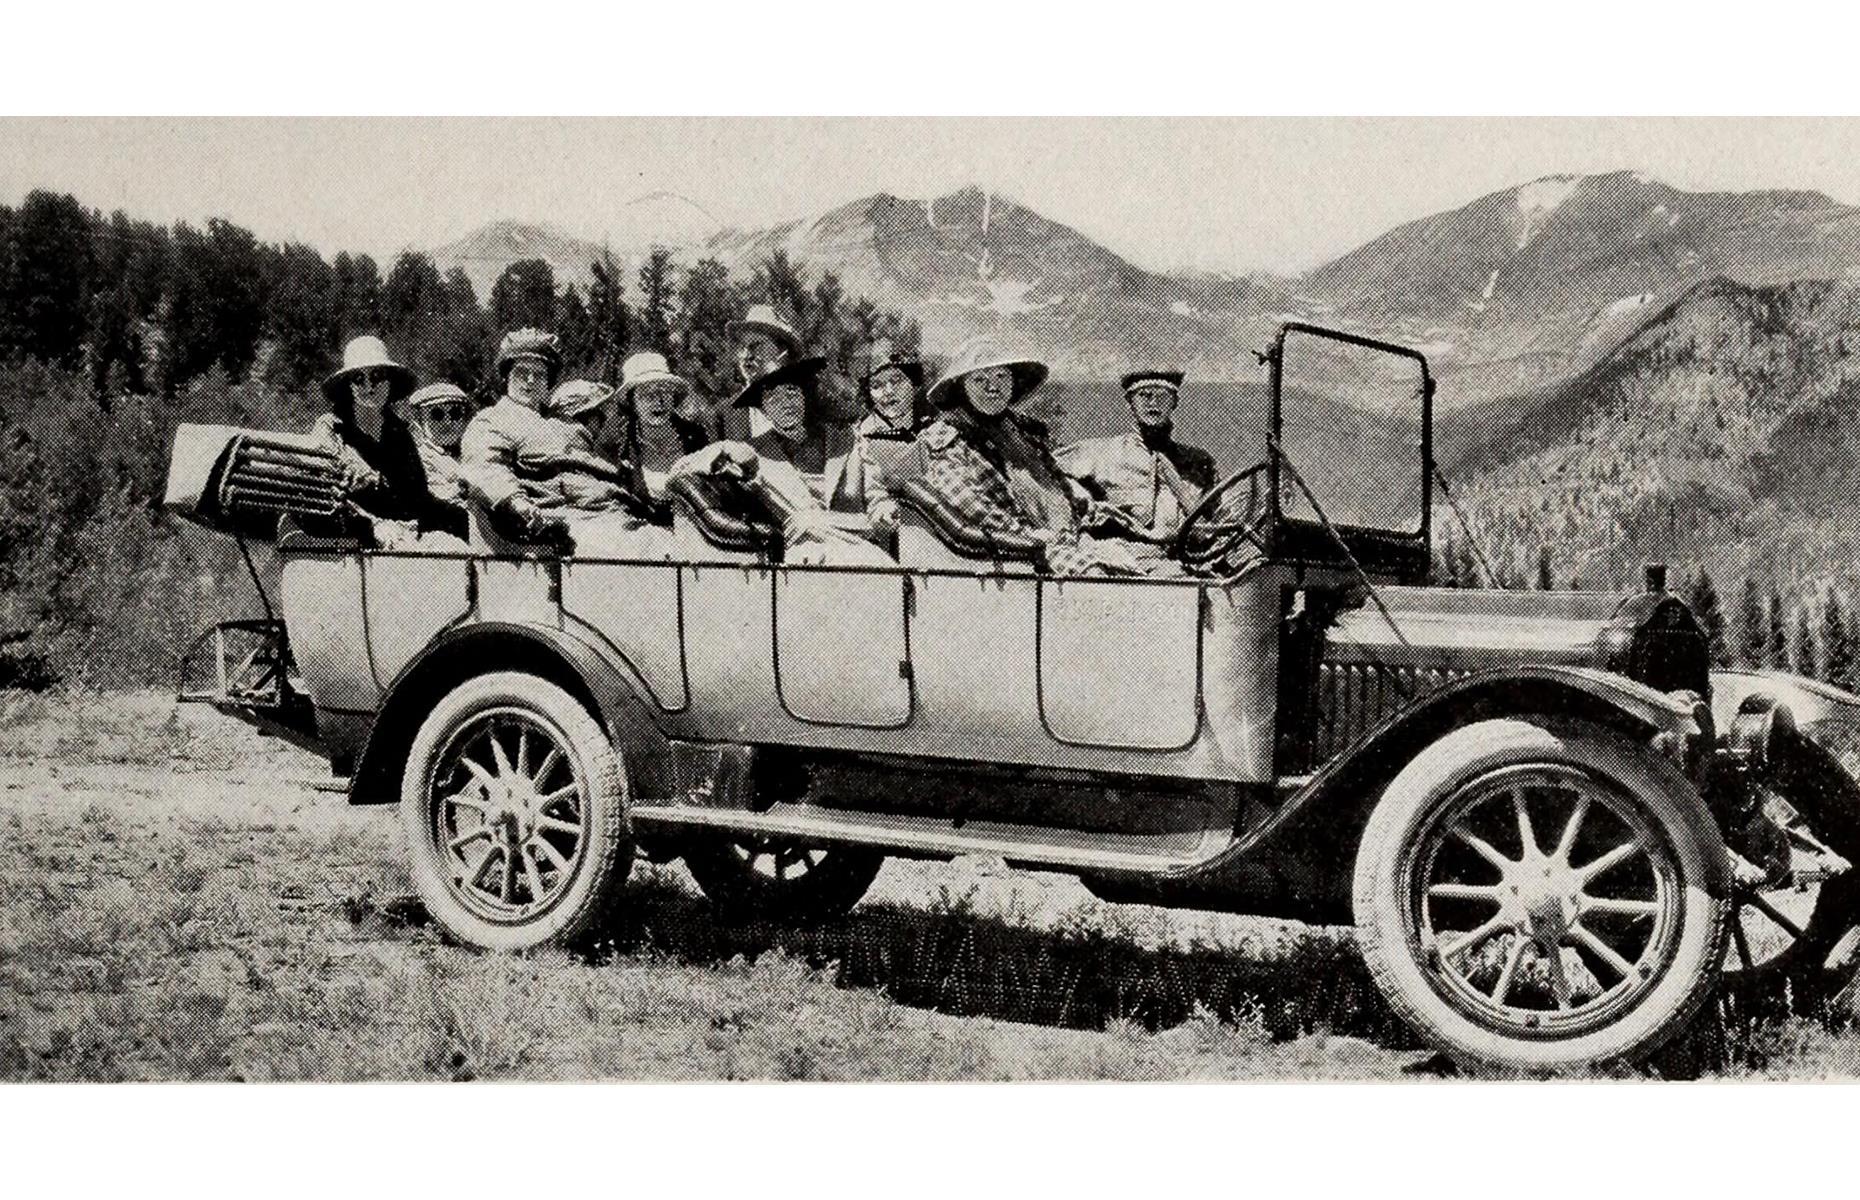 <p>Since the first national parks were signed into law in the late 1800s, Americans began to gain a greater appreciation for the natural beauty in their backyard. Then the arrival of cars made it easier to access them – although it was still a privilege available to the wealthy few who were lucky enough to own one. Pictured here is a group of visitors on a guided “Two National Parks in Two Weeks” tour that swept through Rocky Mountain National Park and Yellowstone National Park.</p>  <p><a href="https://www.facebook.com/loveexploringUK?utm_source=msn&utm_medium=social&utm_campaign=front"><strong>Love this? Follow us on Facebook for more travel inspiration</strong></a></p>